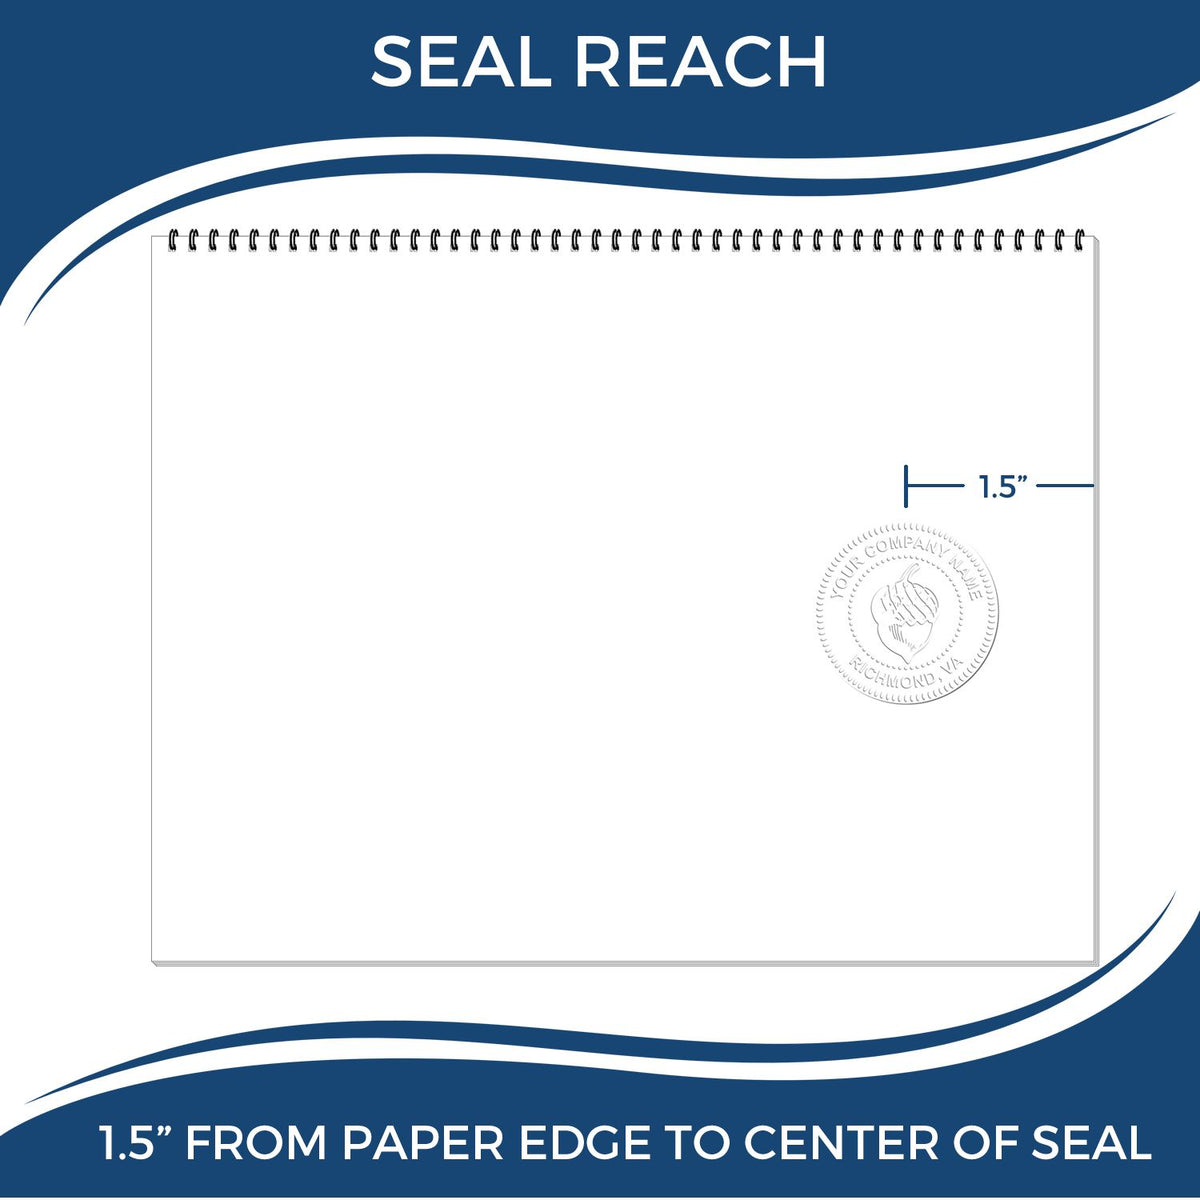 An infographic showing the seal reach which is represented by a ruler and a miniature seal image of the Handheld Montana Professional Engineer Embosser